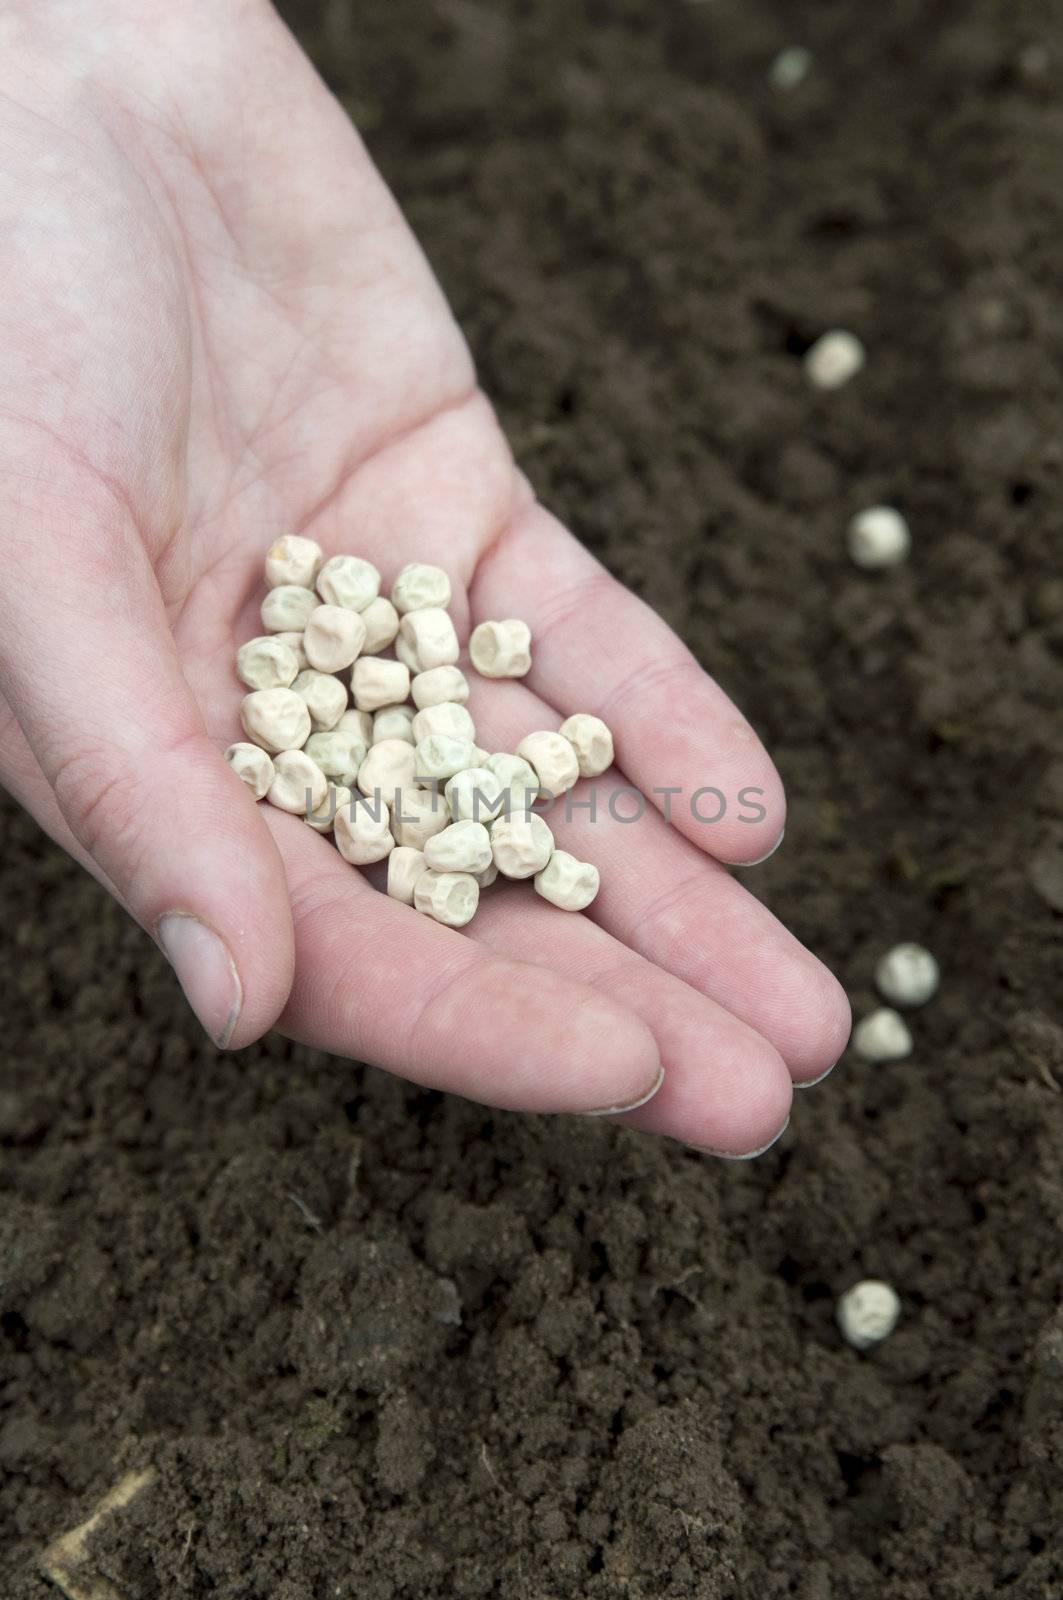 pea planting in the soil